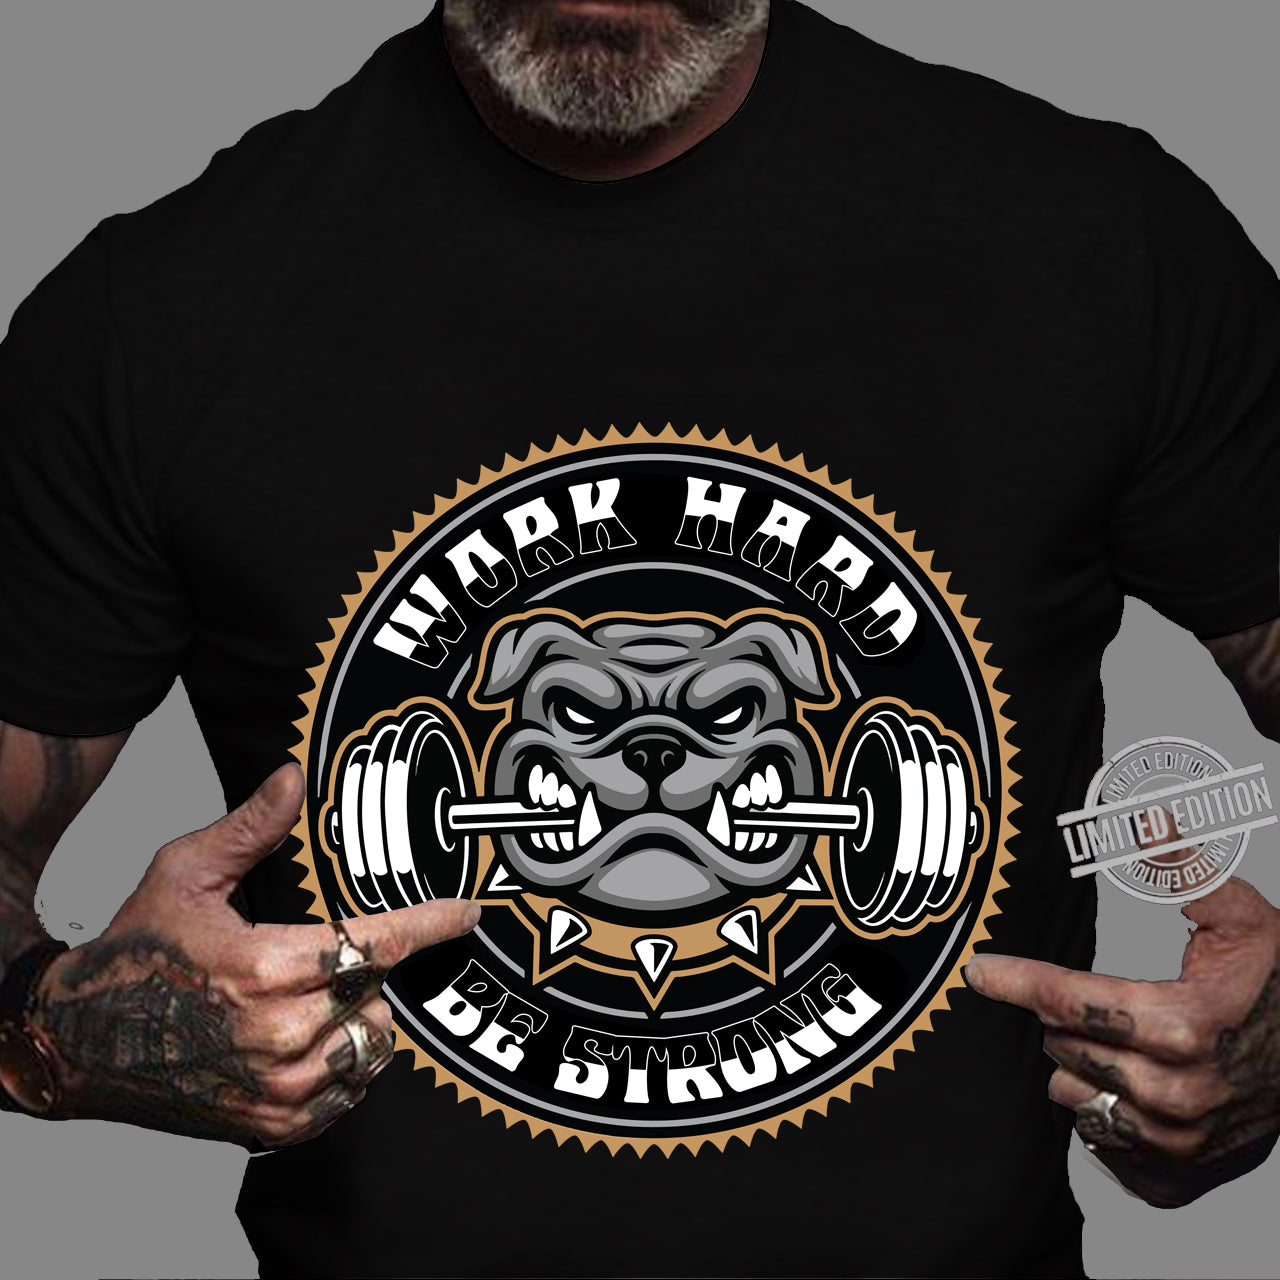 Bodybuilding T-Shirt Motivation Gym Workout Fitness Shirts Work Hard Be Strong